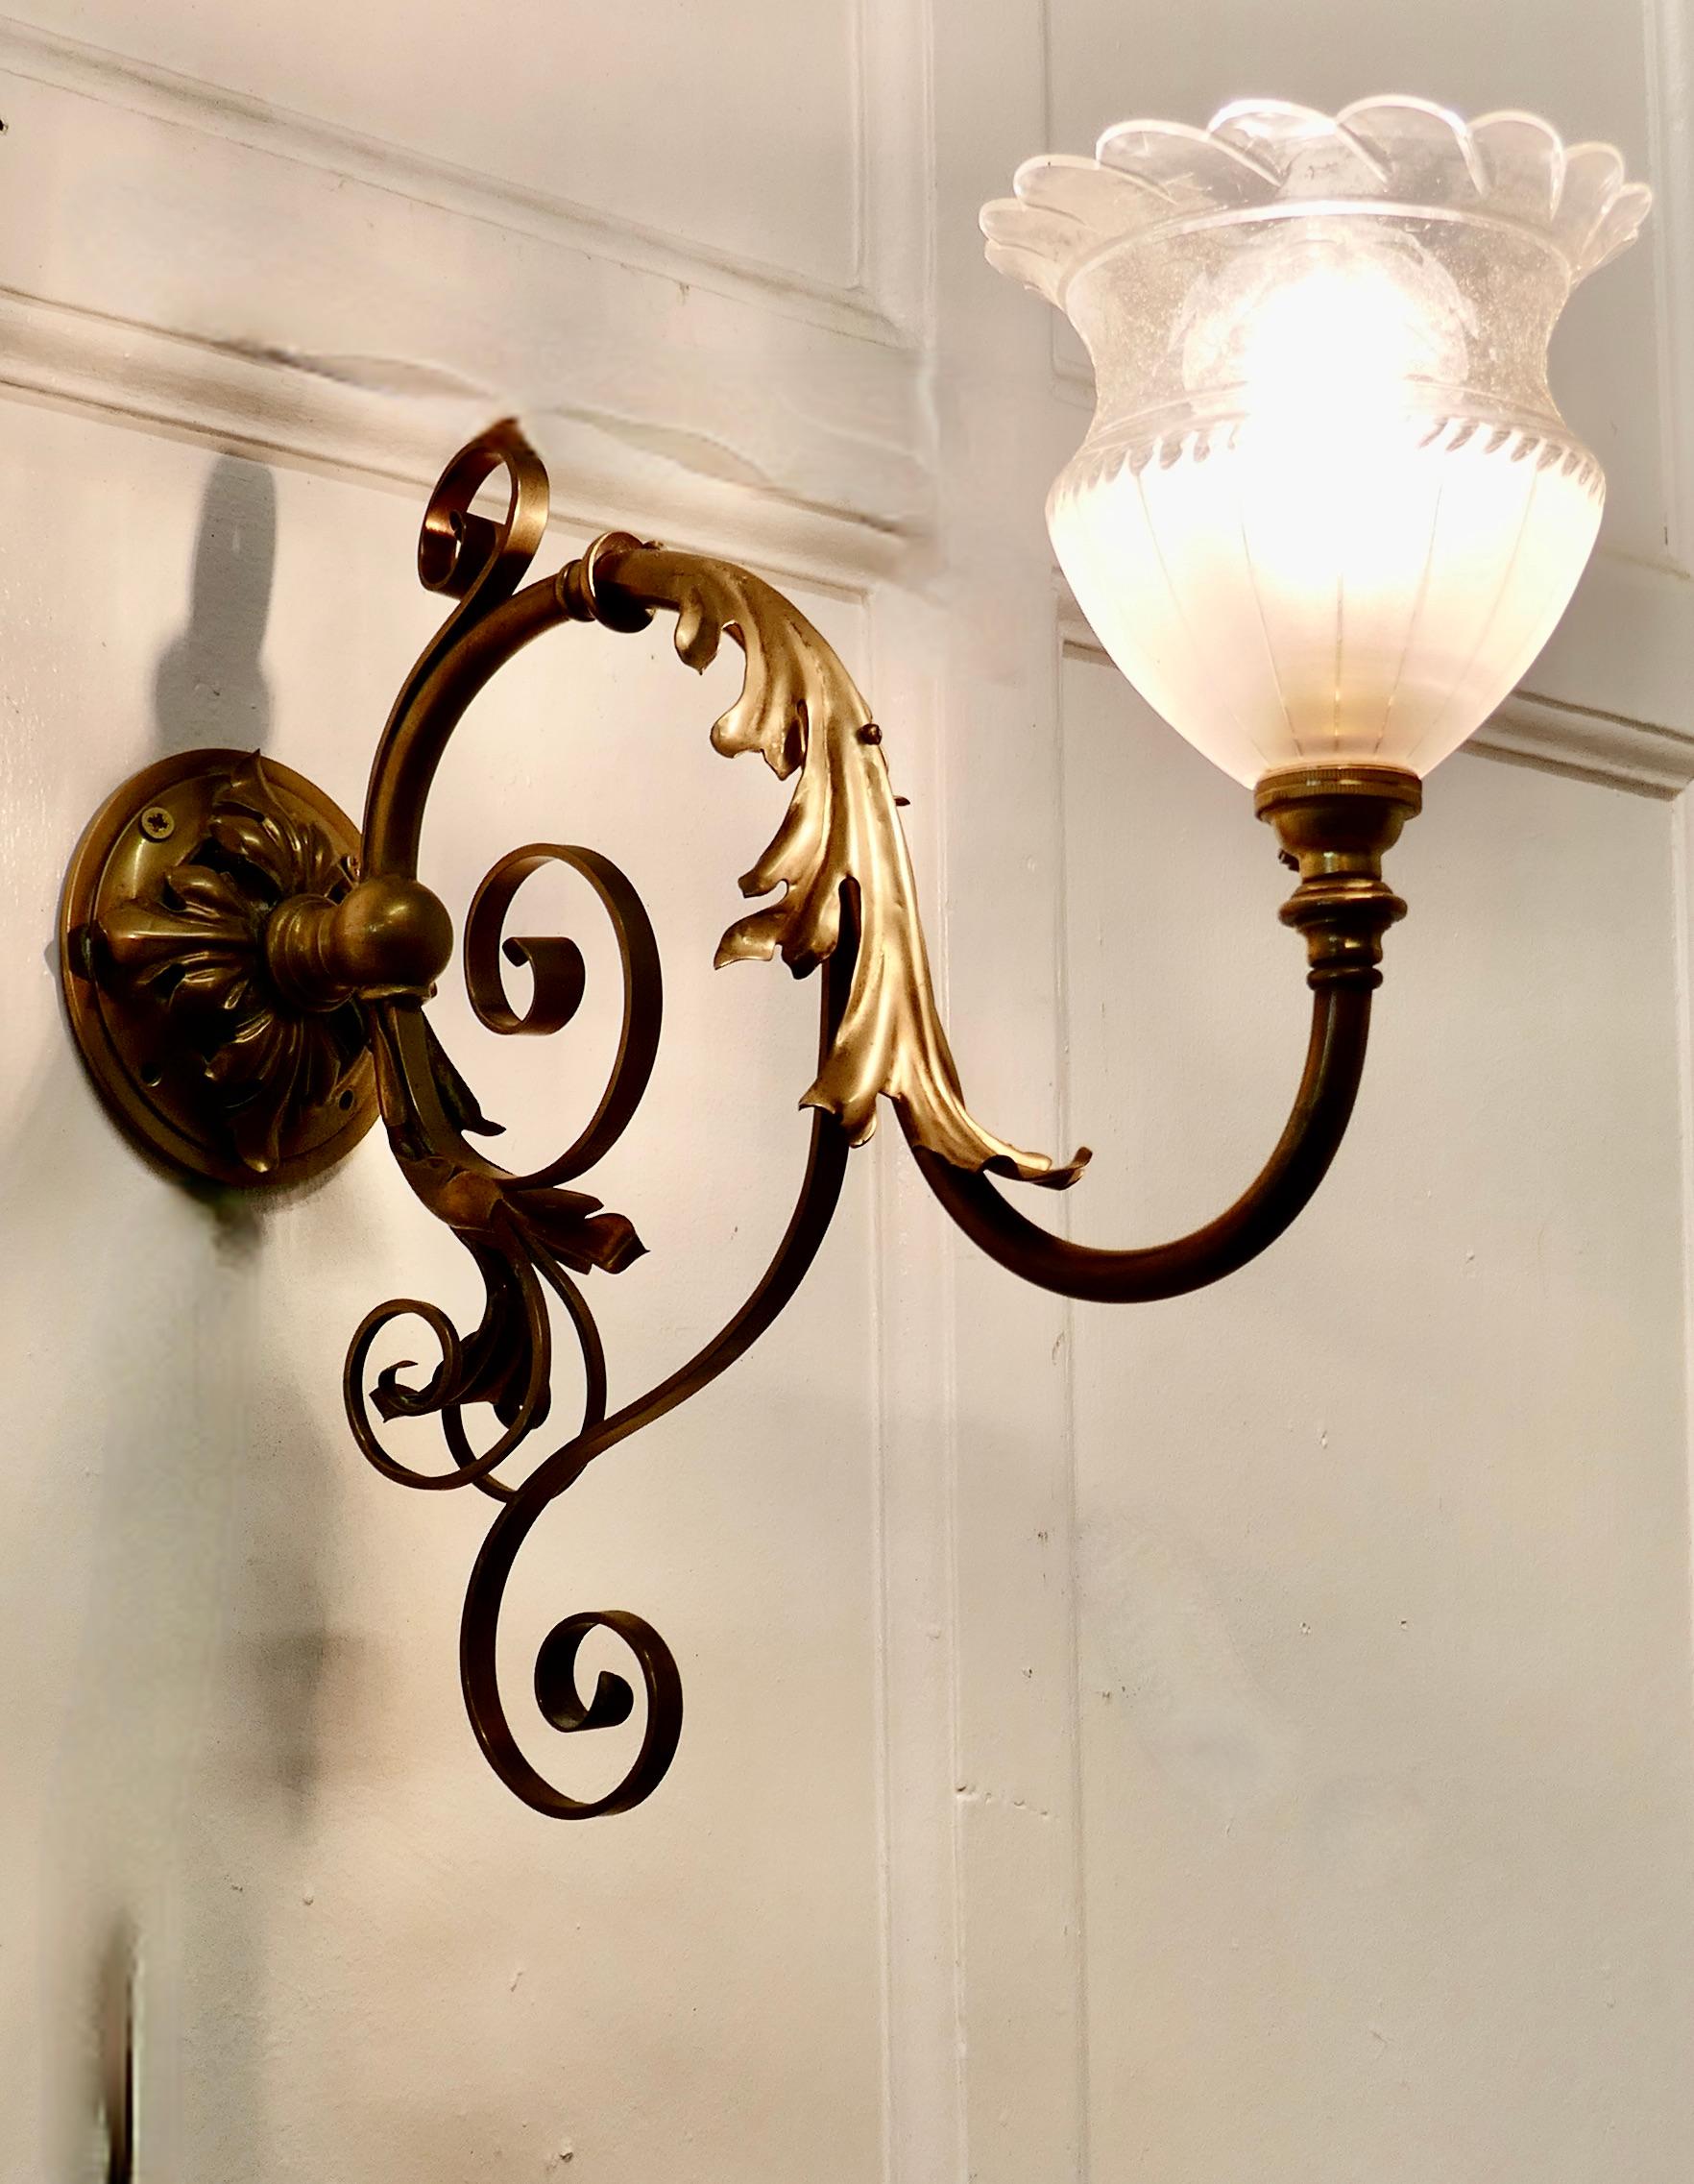 Victorian brass wall light with flower shade

The Light has a brass swan neck arm decorated with acanthus leaves, and a Flower design crystal shade
The Brass is darkened with age, the shade is original and not damaged
This piece is working, with